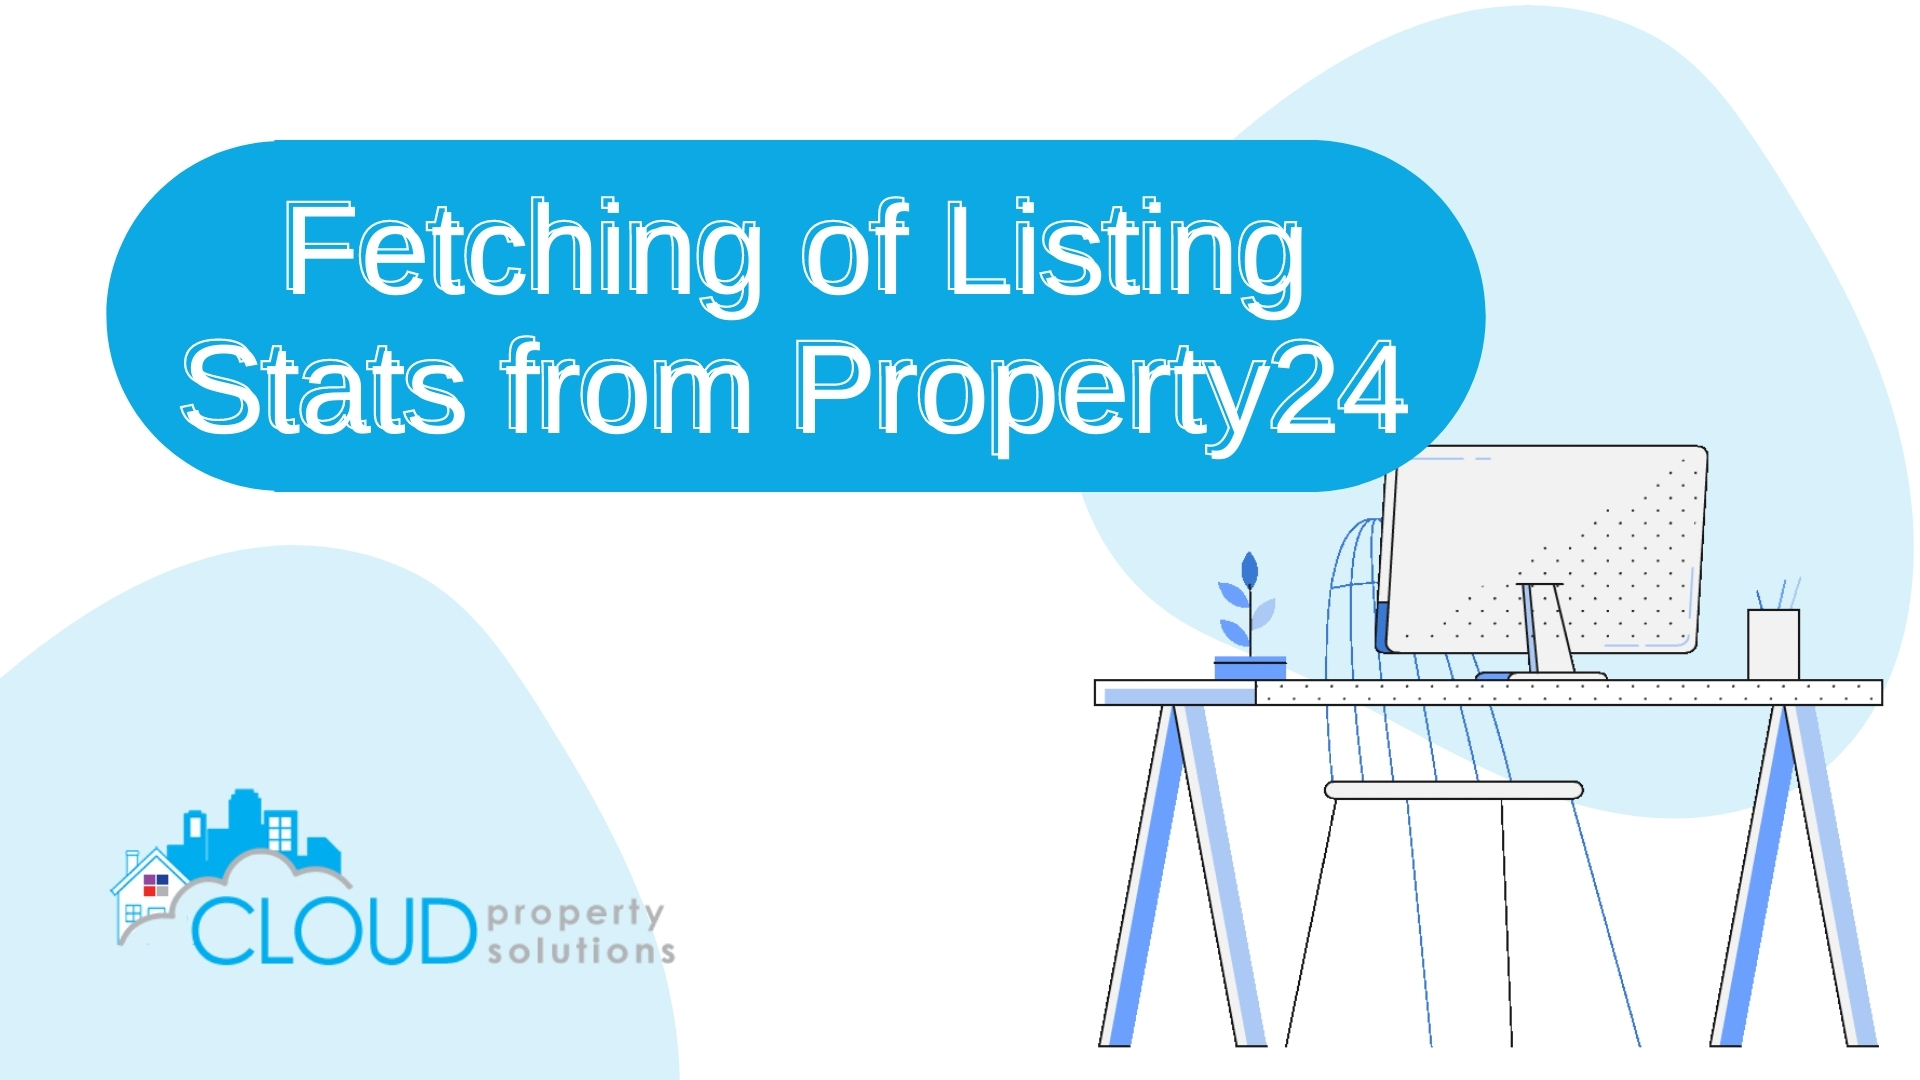 Fetching of listing stats from your Property24 account.